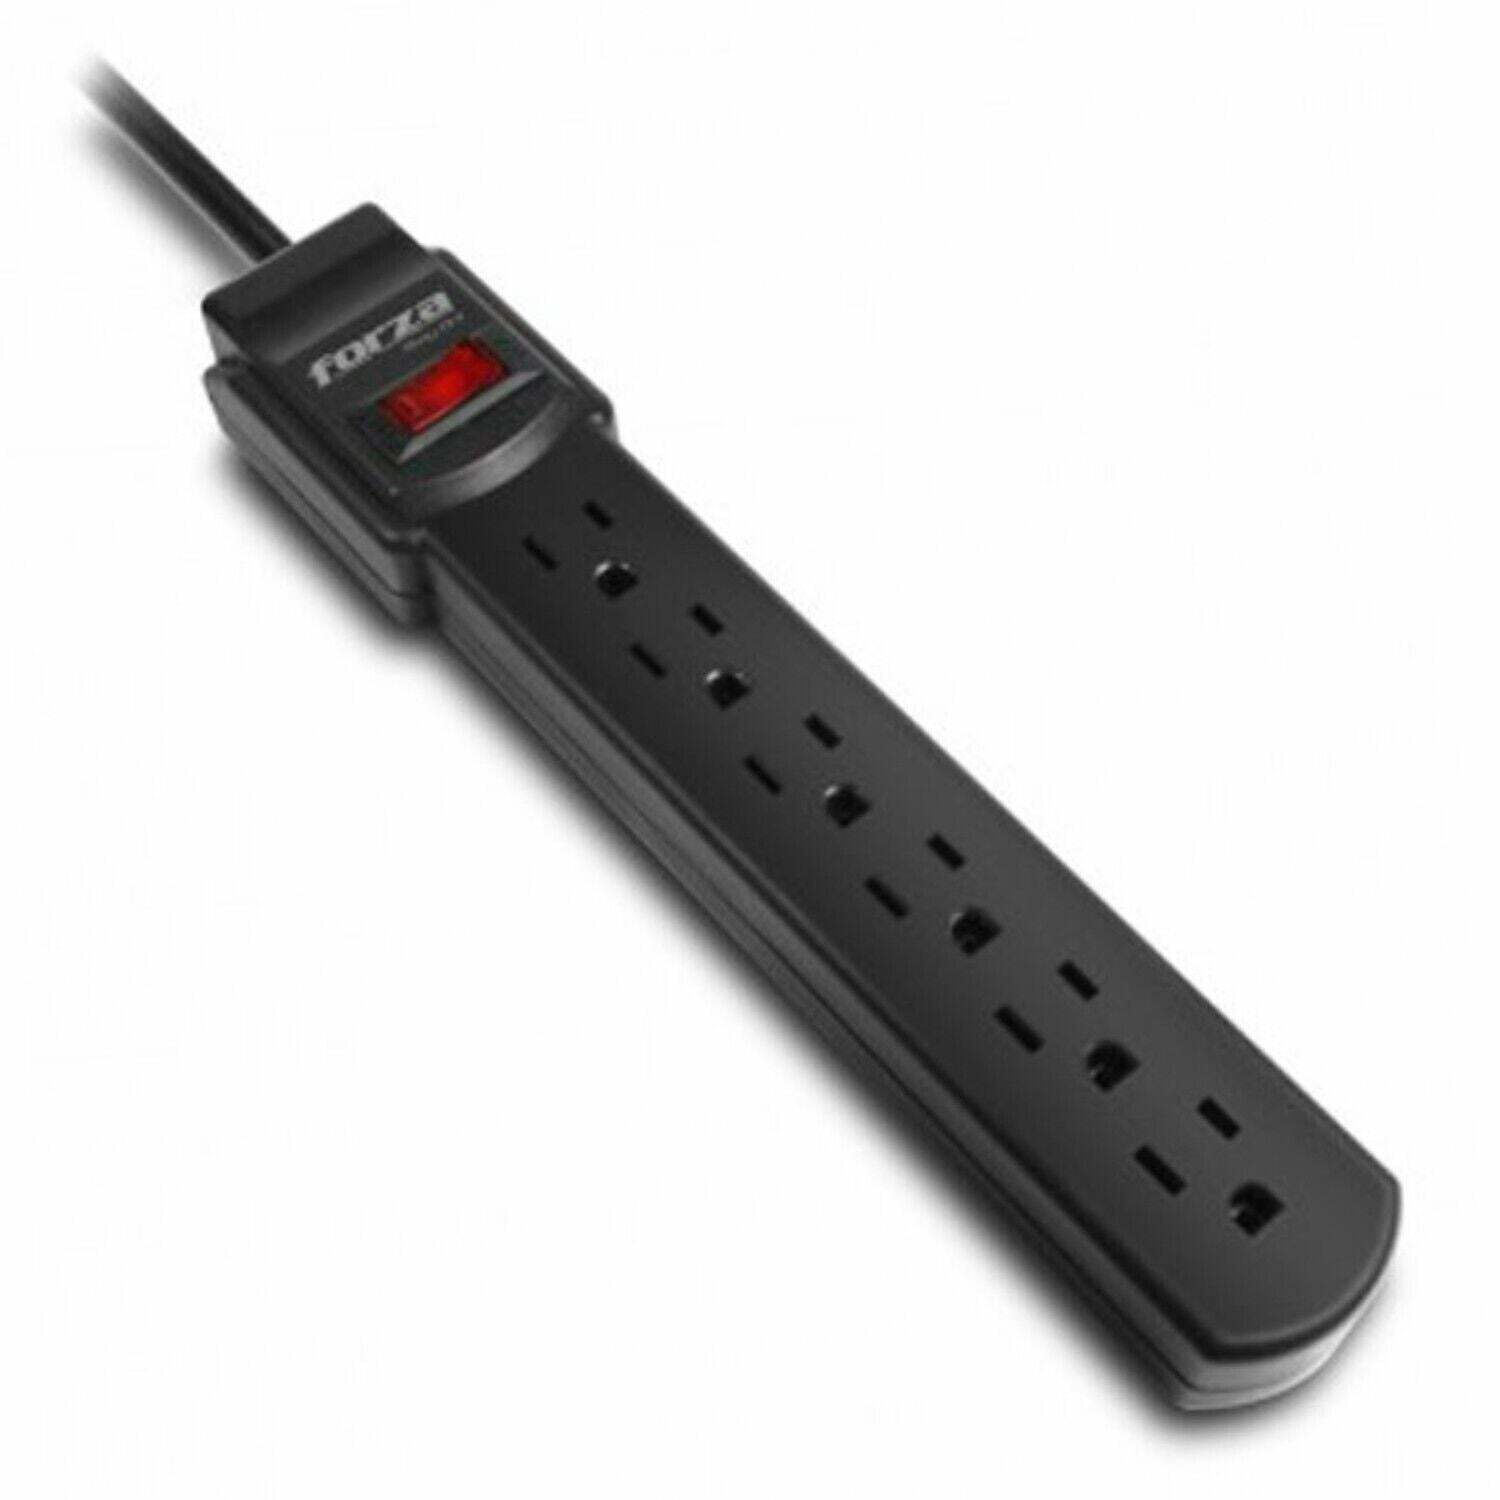 Forza Power Technologies - Surge Protector 90J/1875W, 6 Outlets 110V